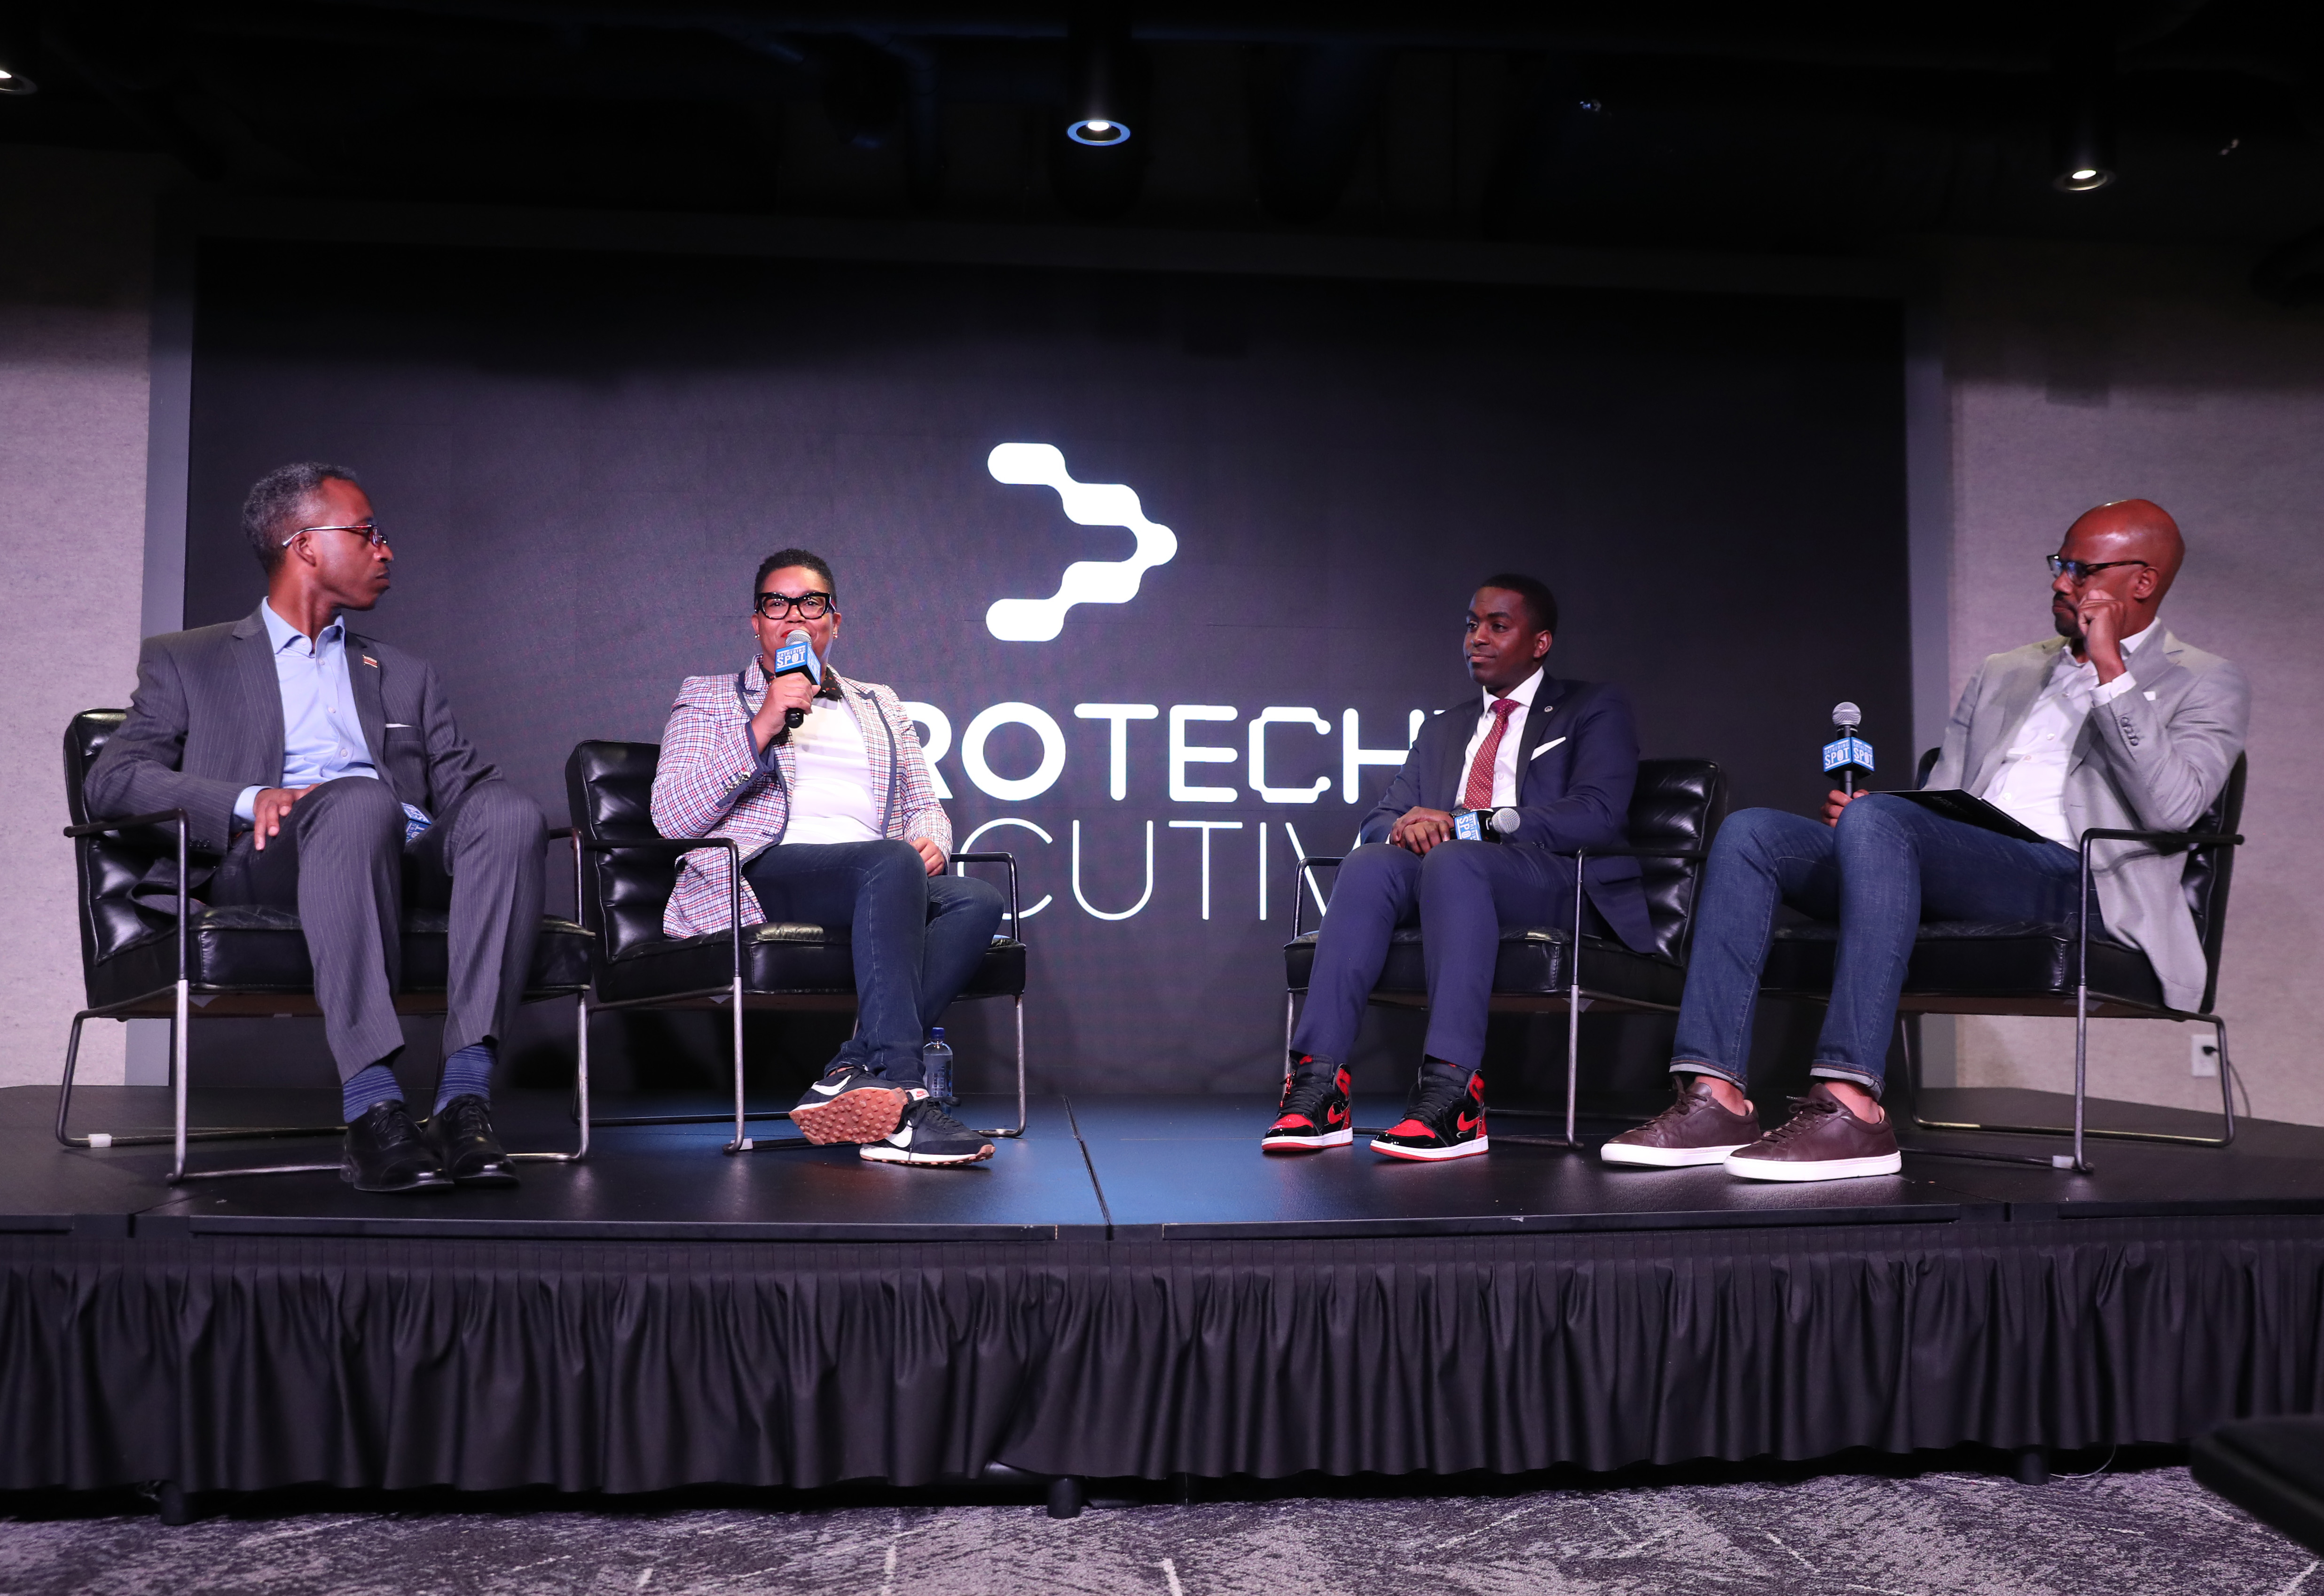 Black Spending Power And How To Use It To Our Advantage Was The Main Course For AfroTech Executive Washington, D.C.